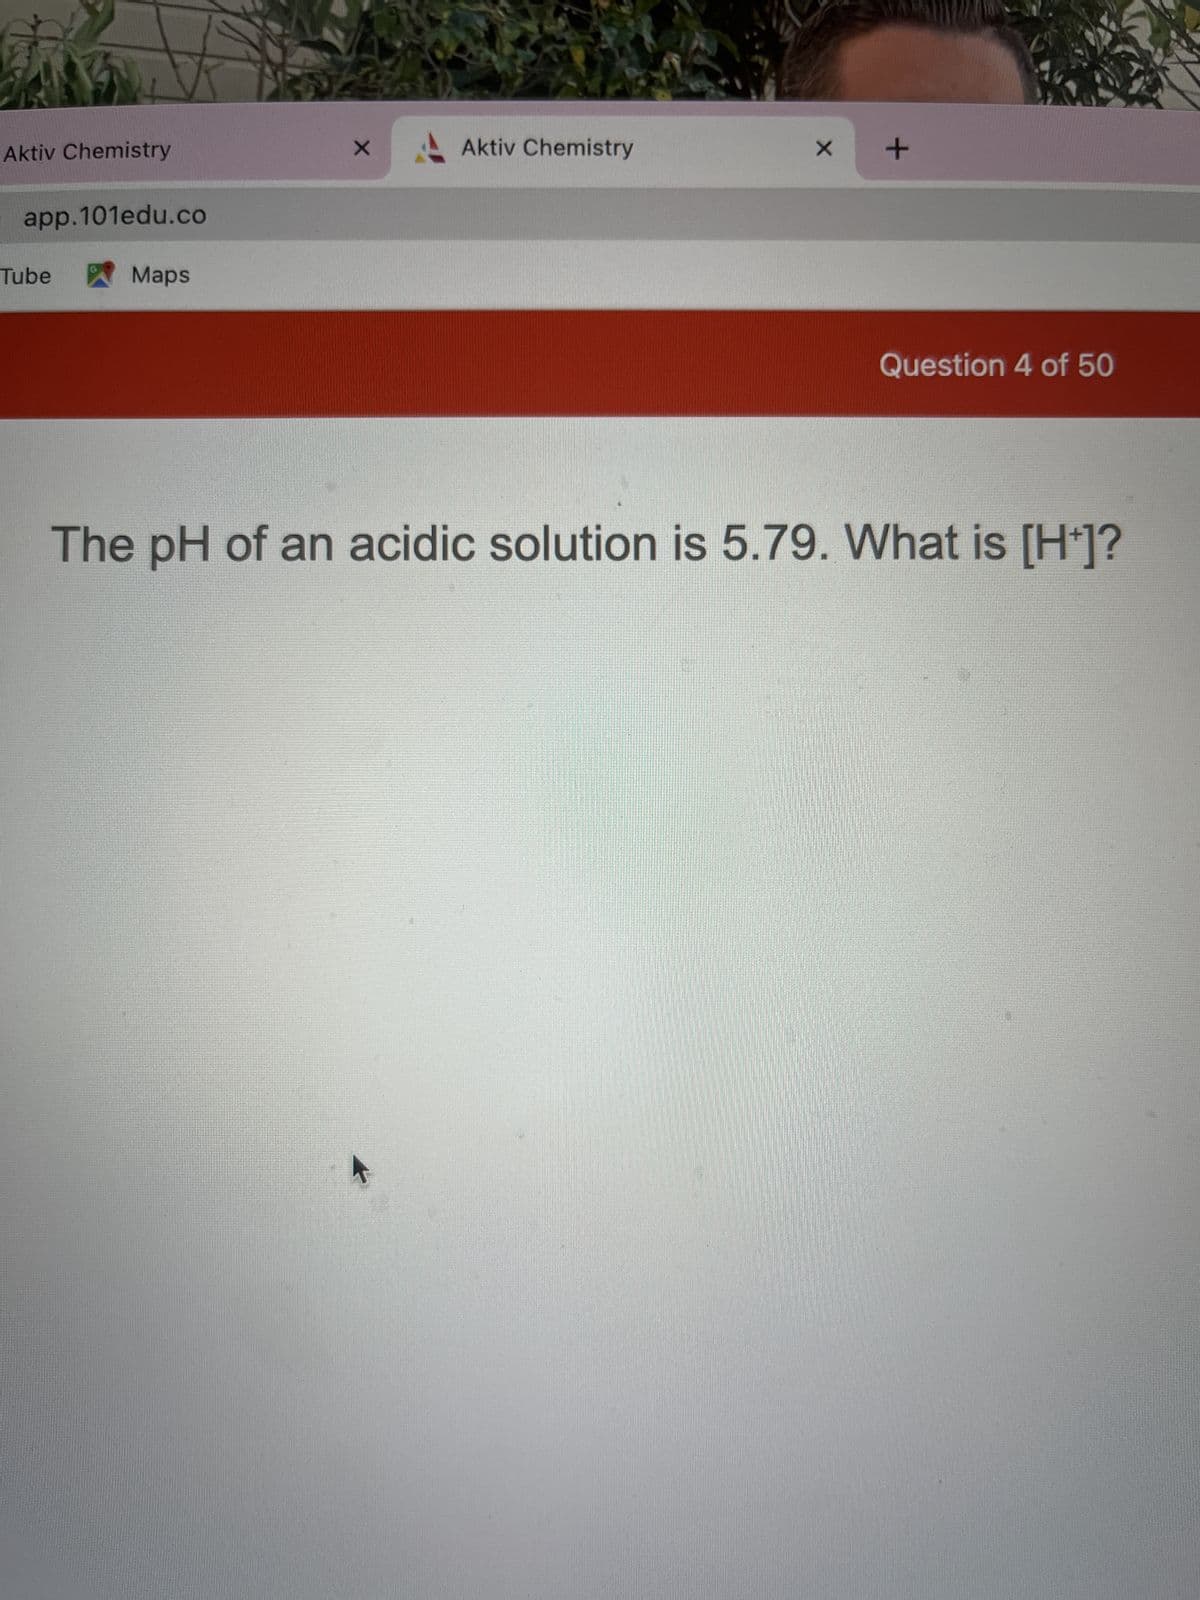 Aktiv Chemistry
app.101edu.co
Tube
G
Maps
X
Aktiv Chemistry
X
+
Question 4 of 50
The pH of an acidic solution is 5.79. What is [H+]?